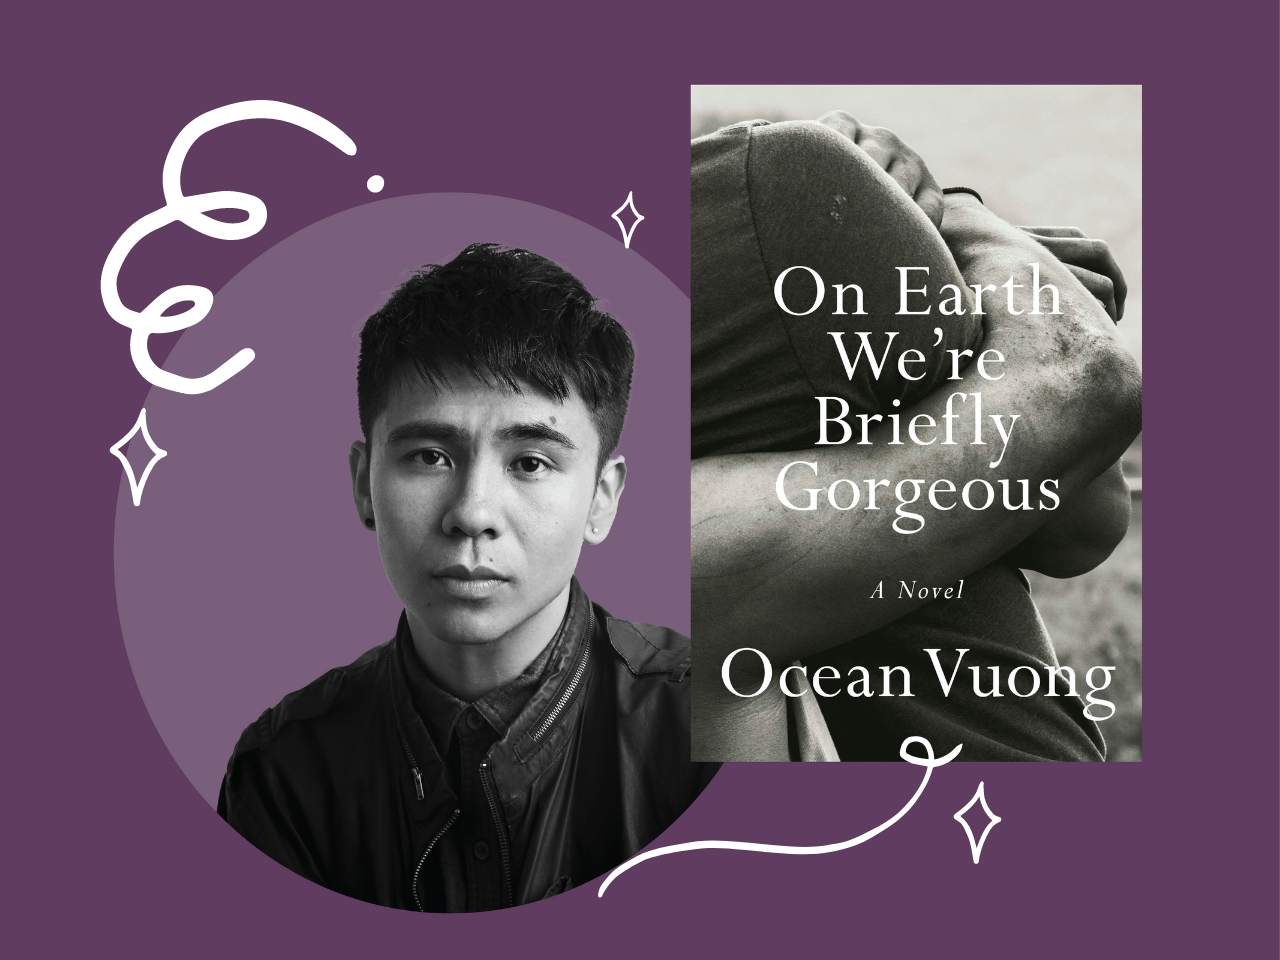 Grounded in the Abstract: Ocean Vuong's Lesson About Ourselves